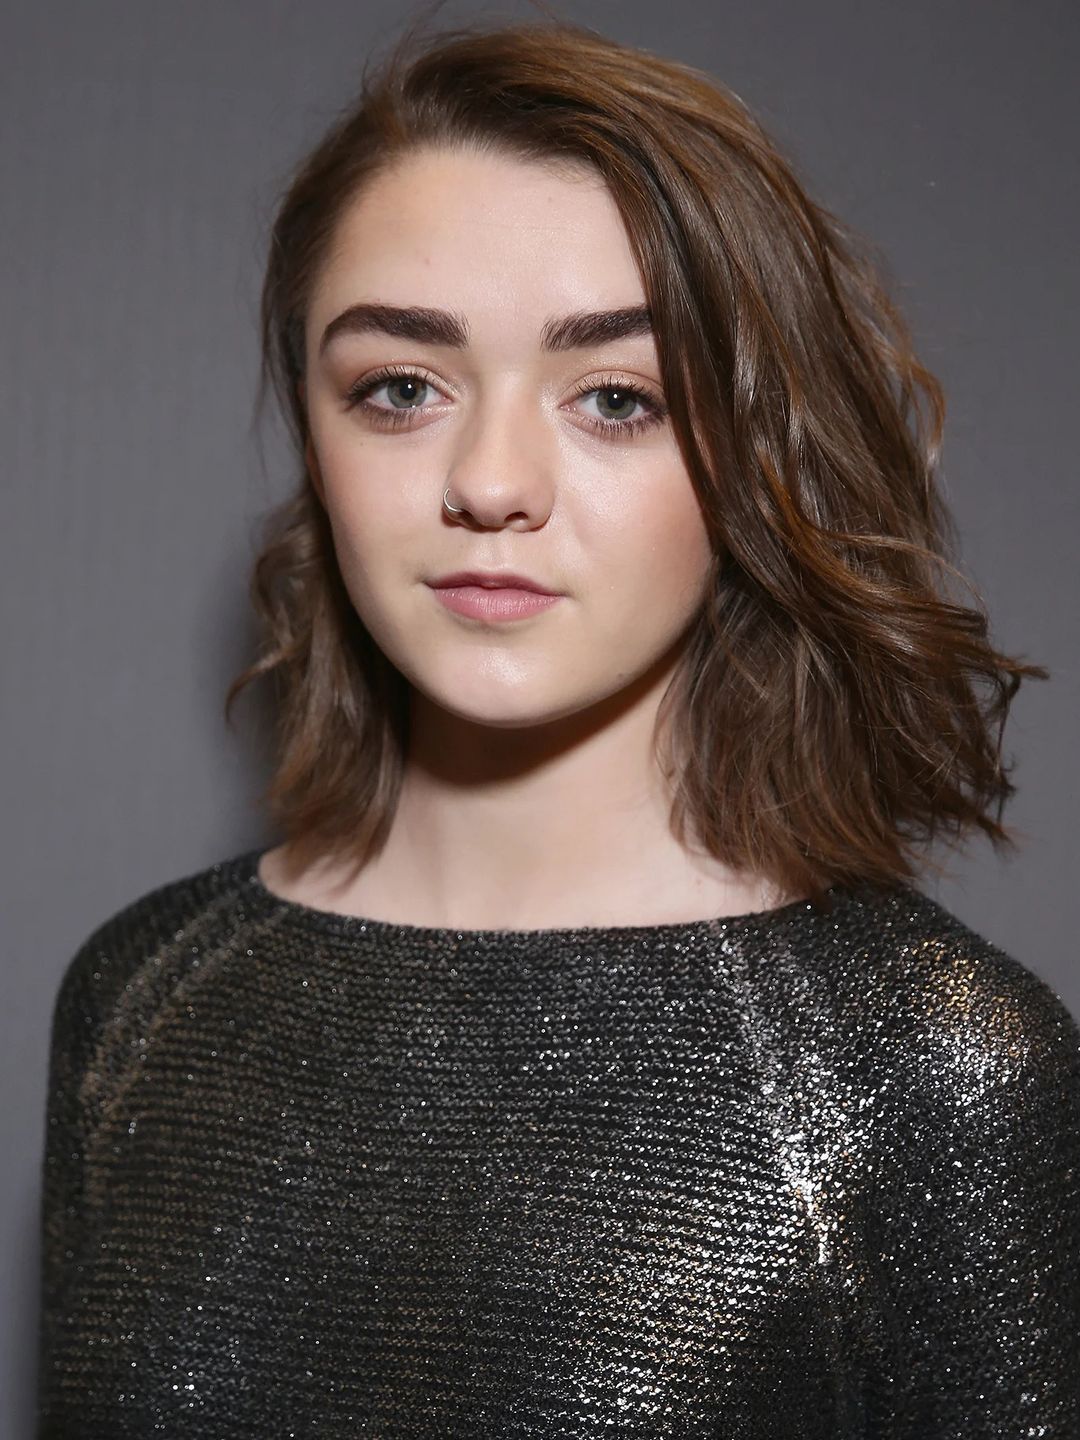 Maisie Williams early childhood